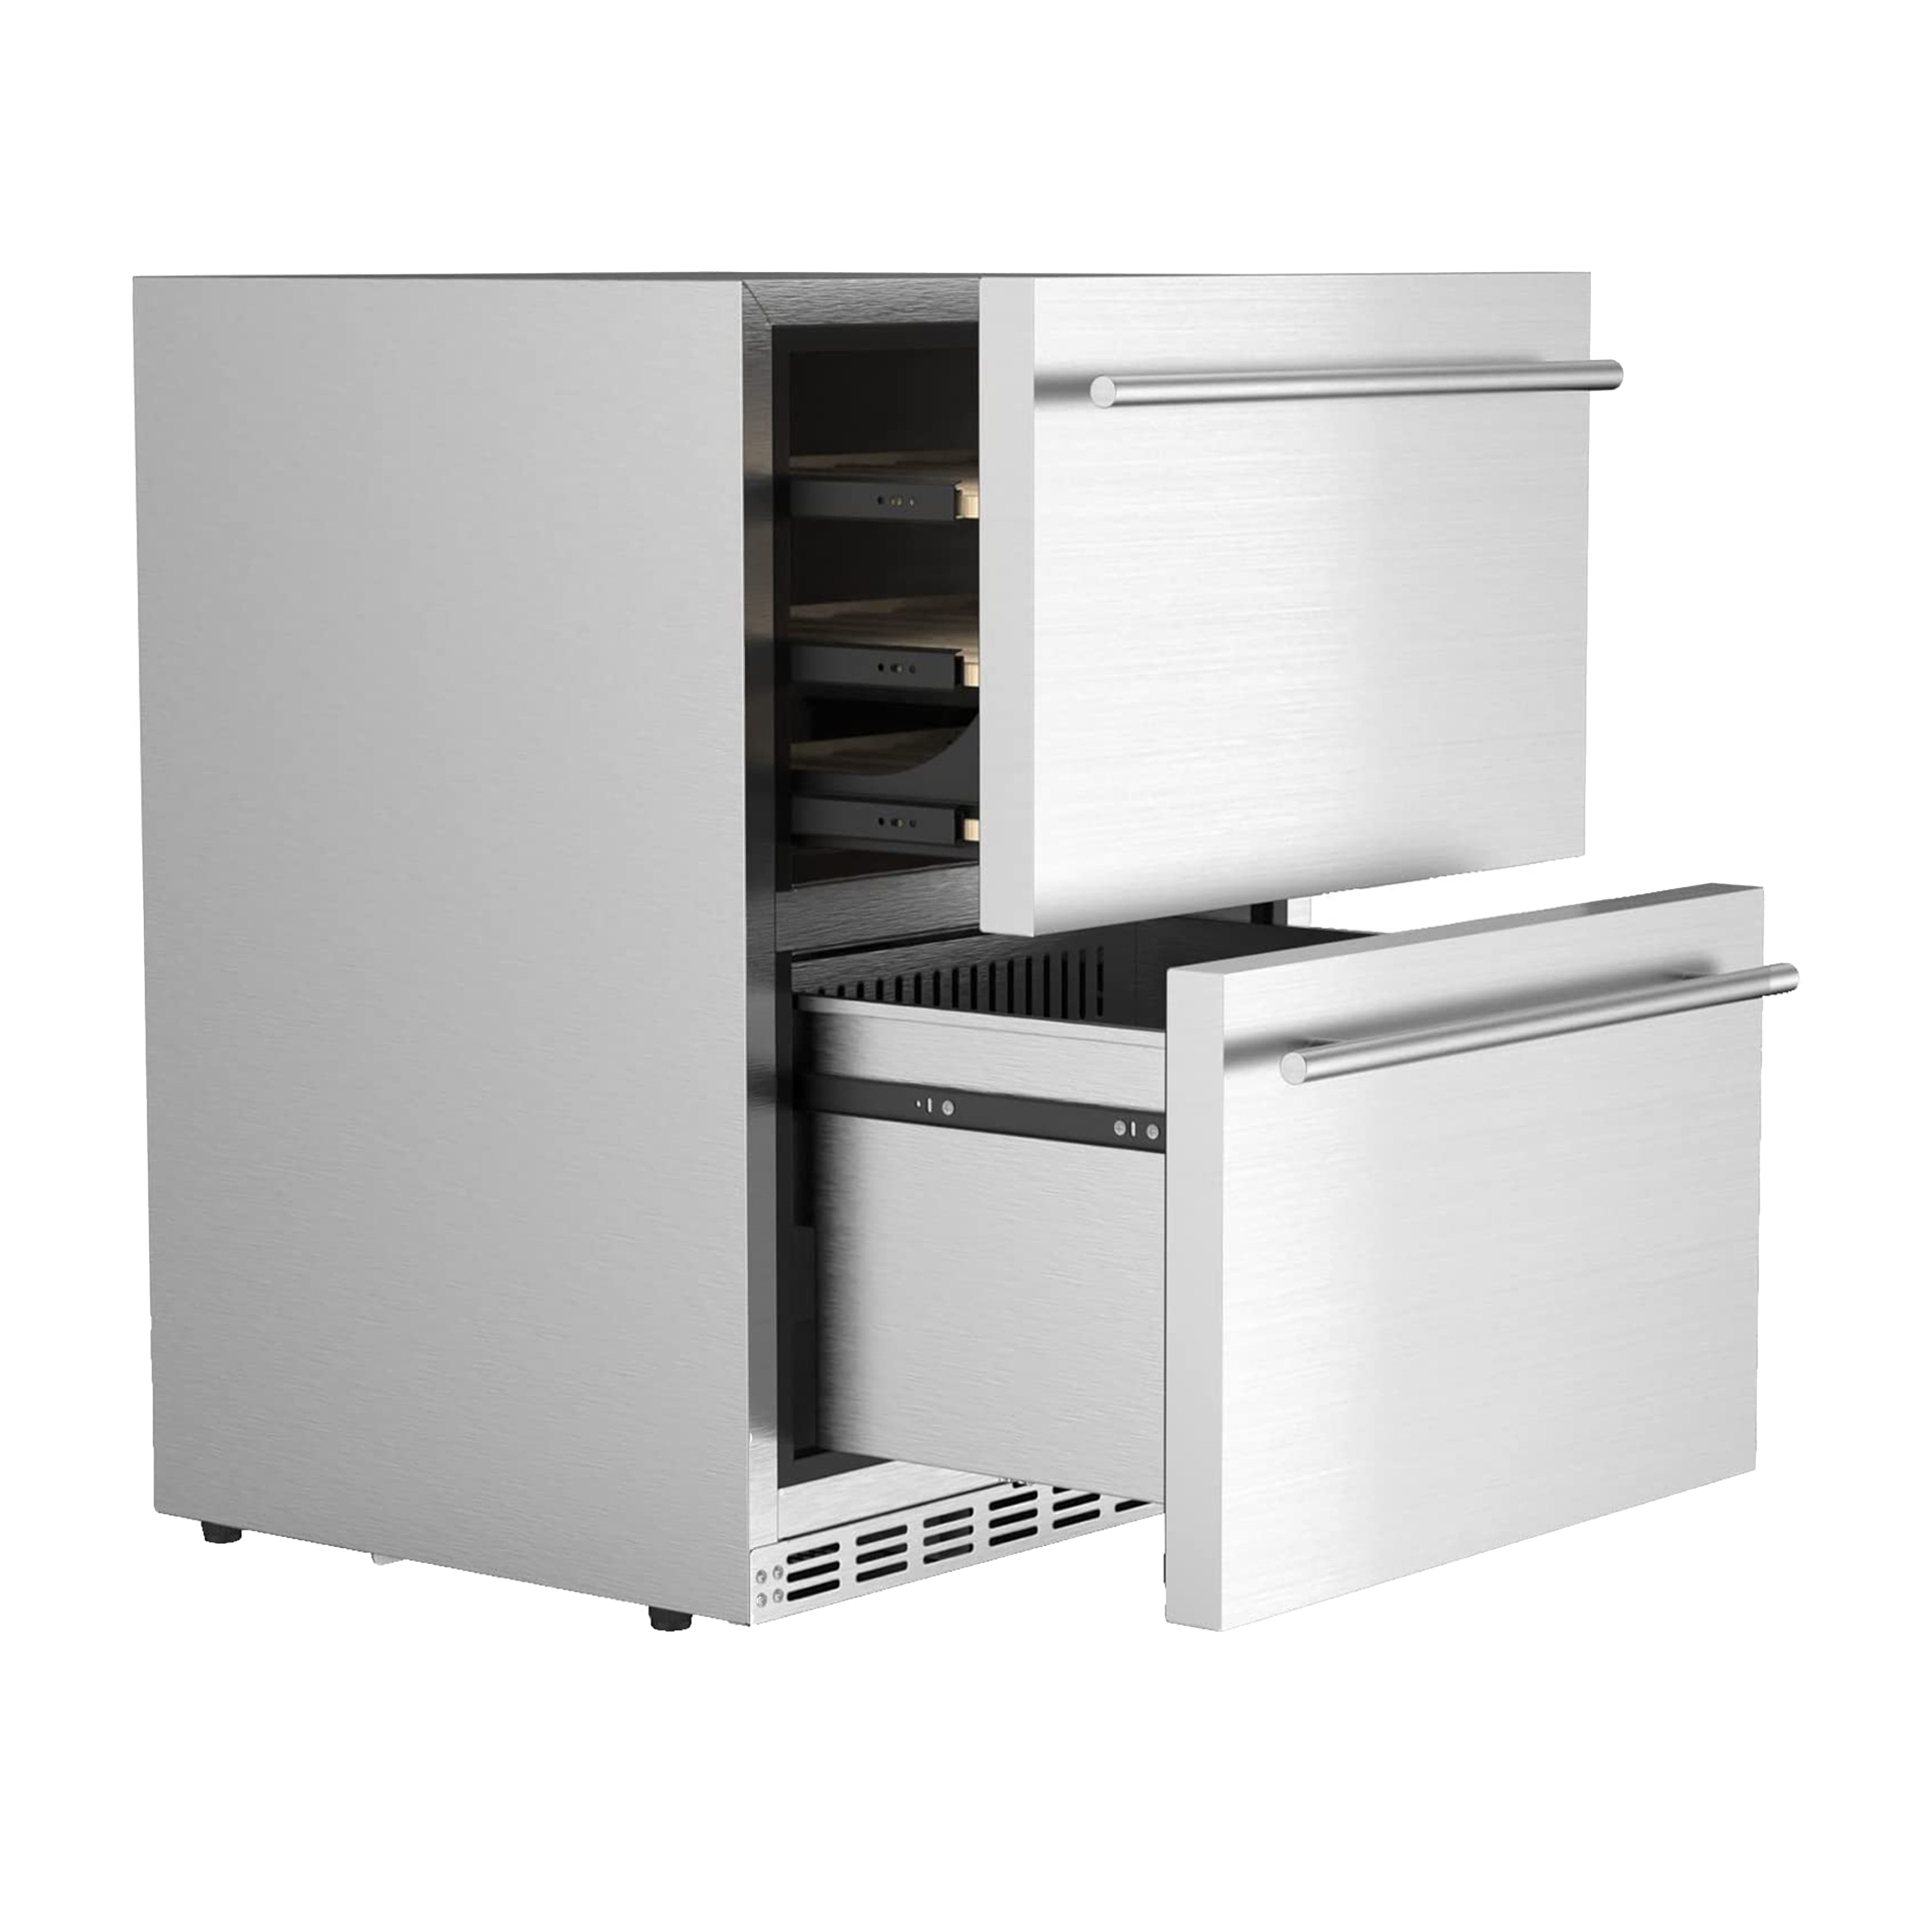 Side view of a 5.29 Cu Ft Stainless Steel Dual Zone Outdoor Refrigerator, showcasing the drawers pulled out